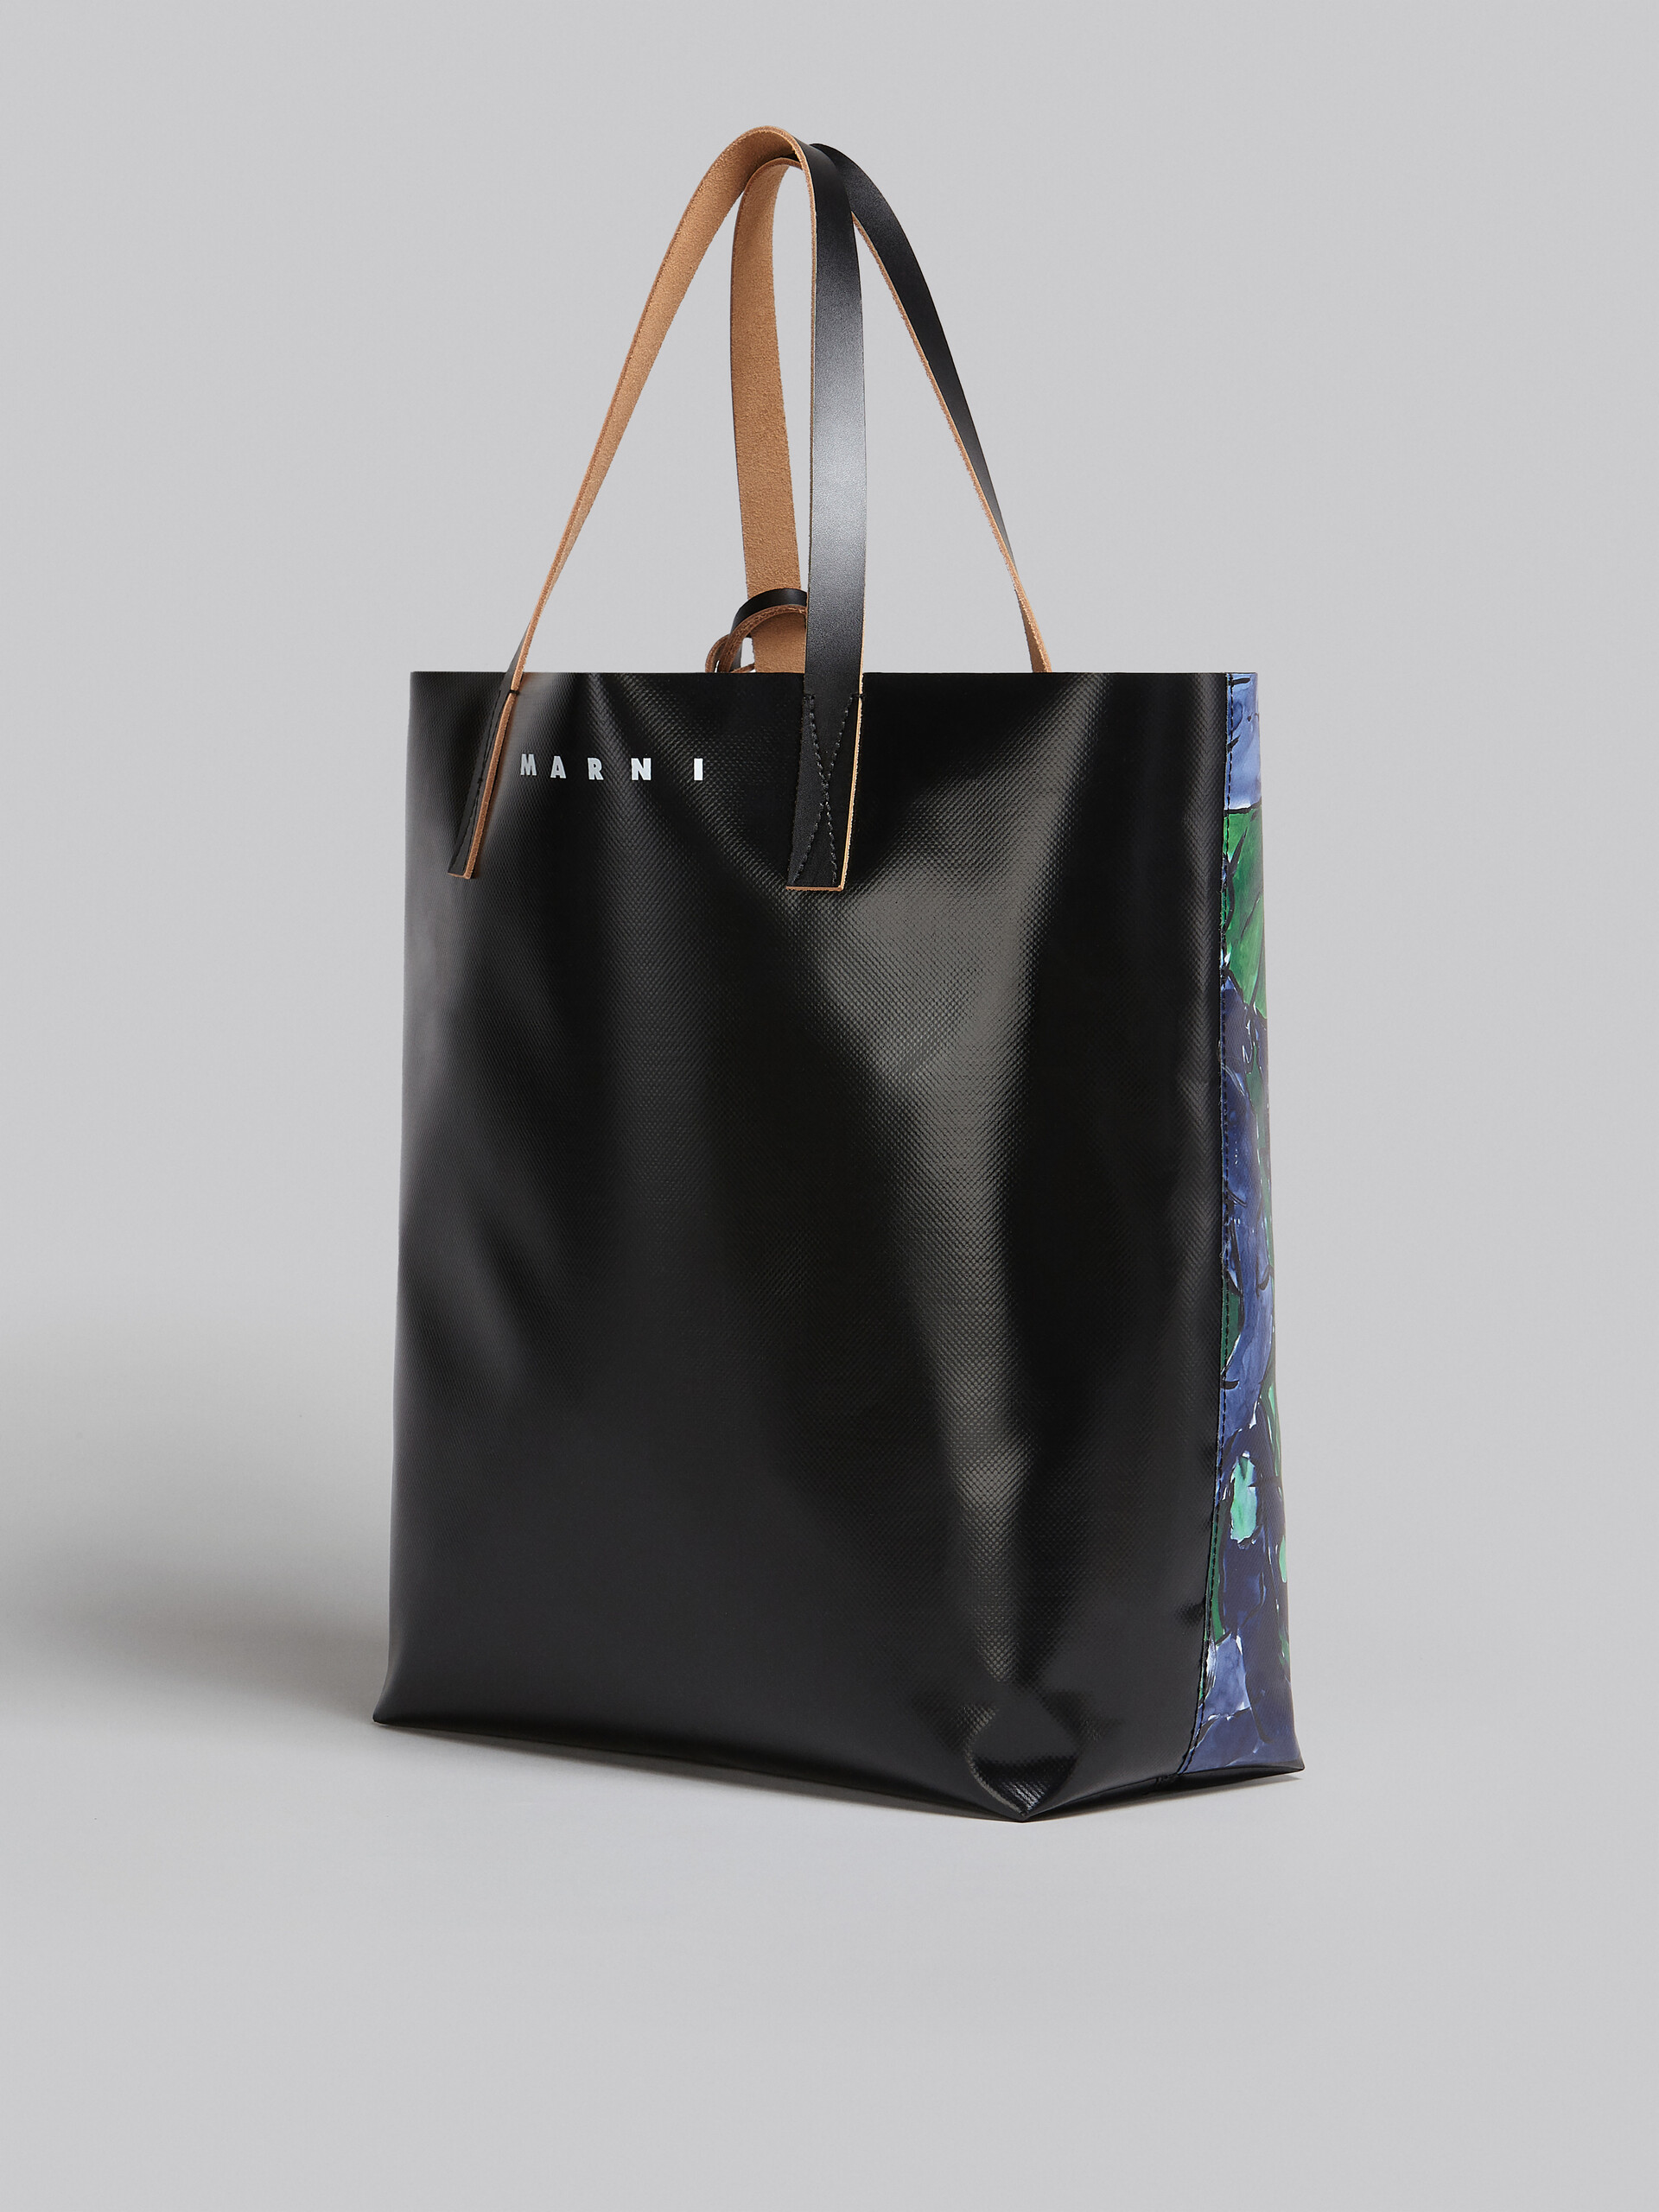 Tribeca shopping bag with Blue and green Mani print - Shopping Bags - Image 3